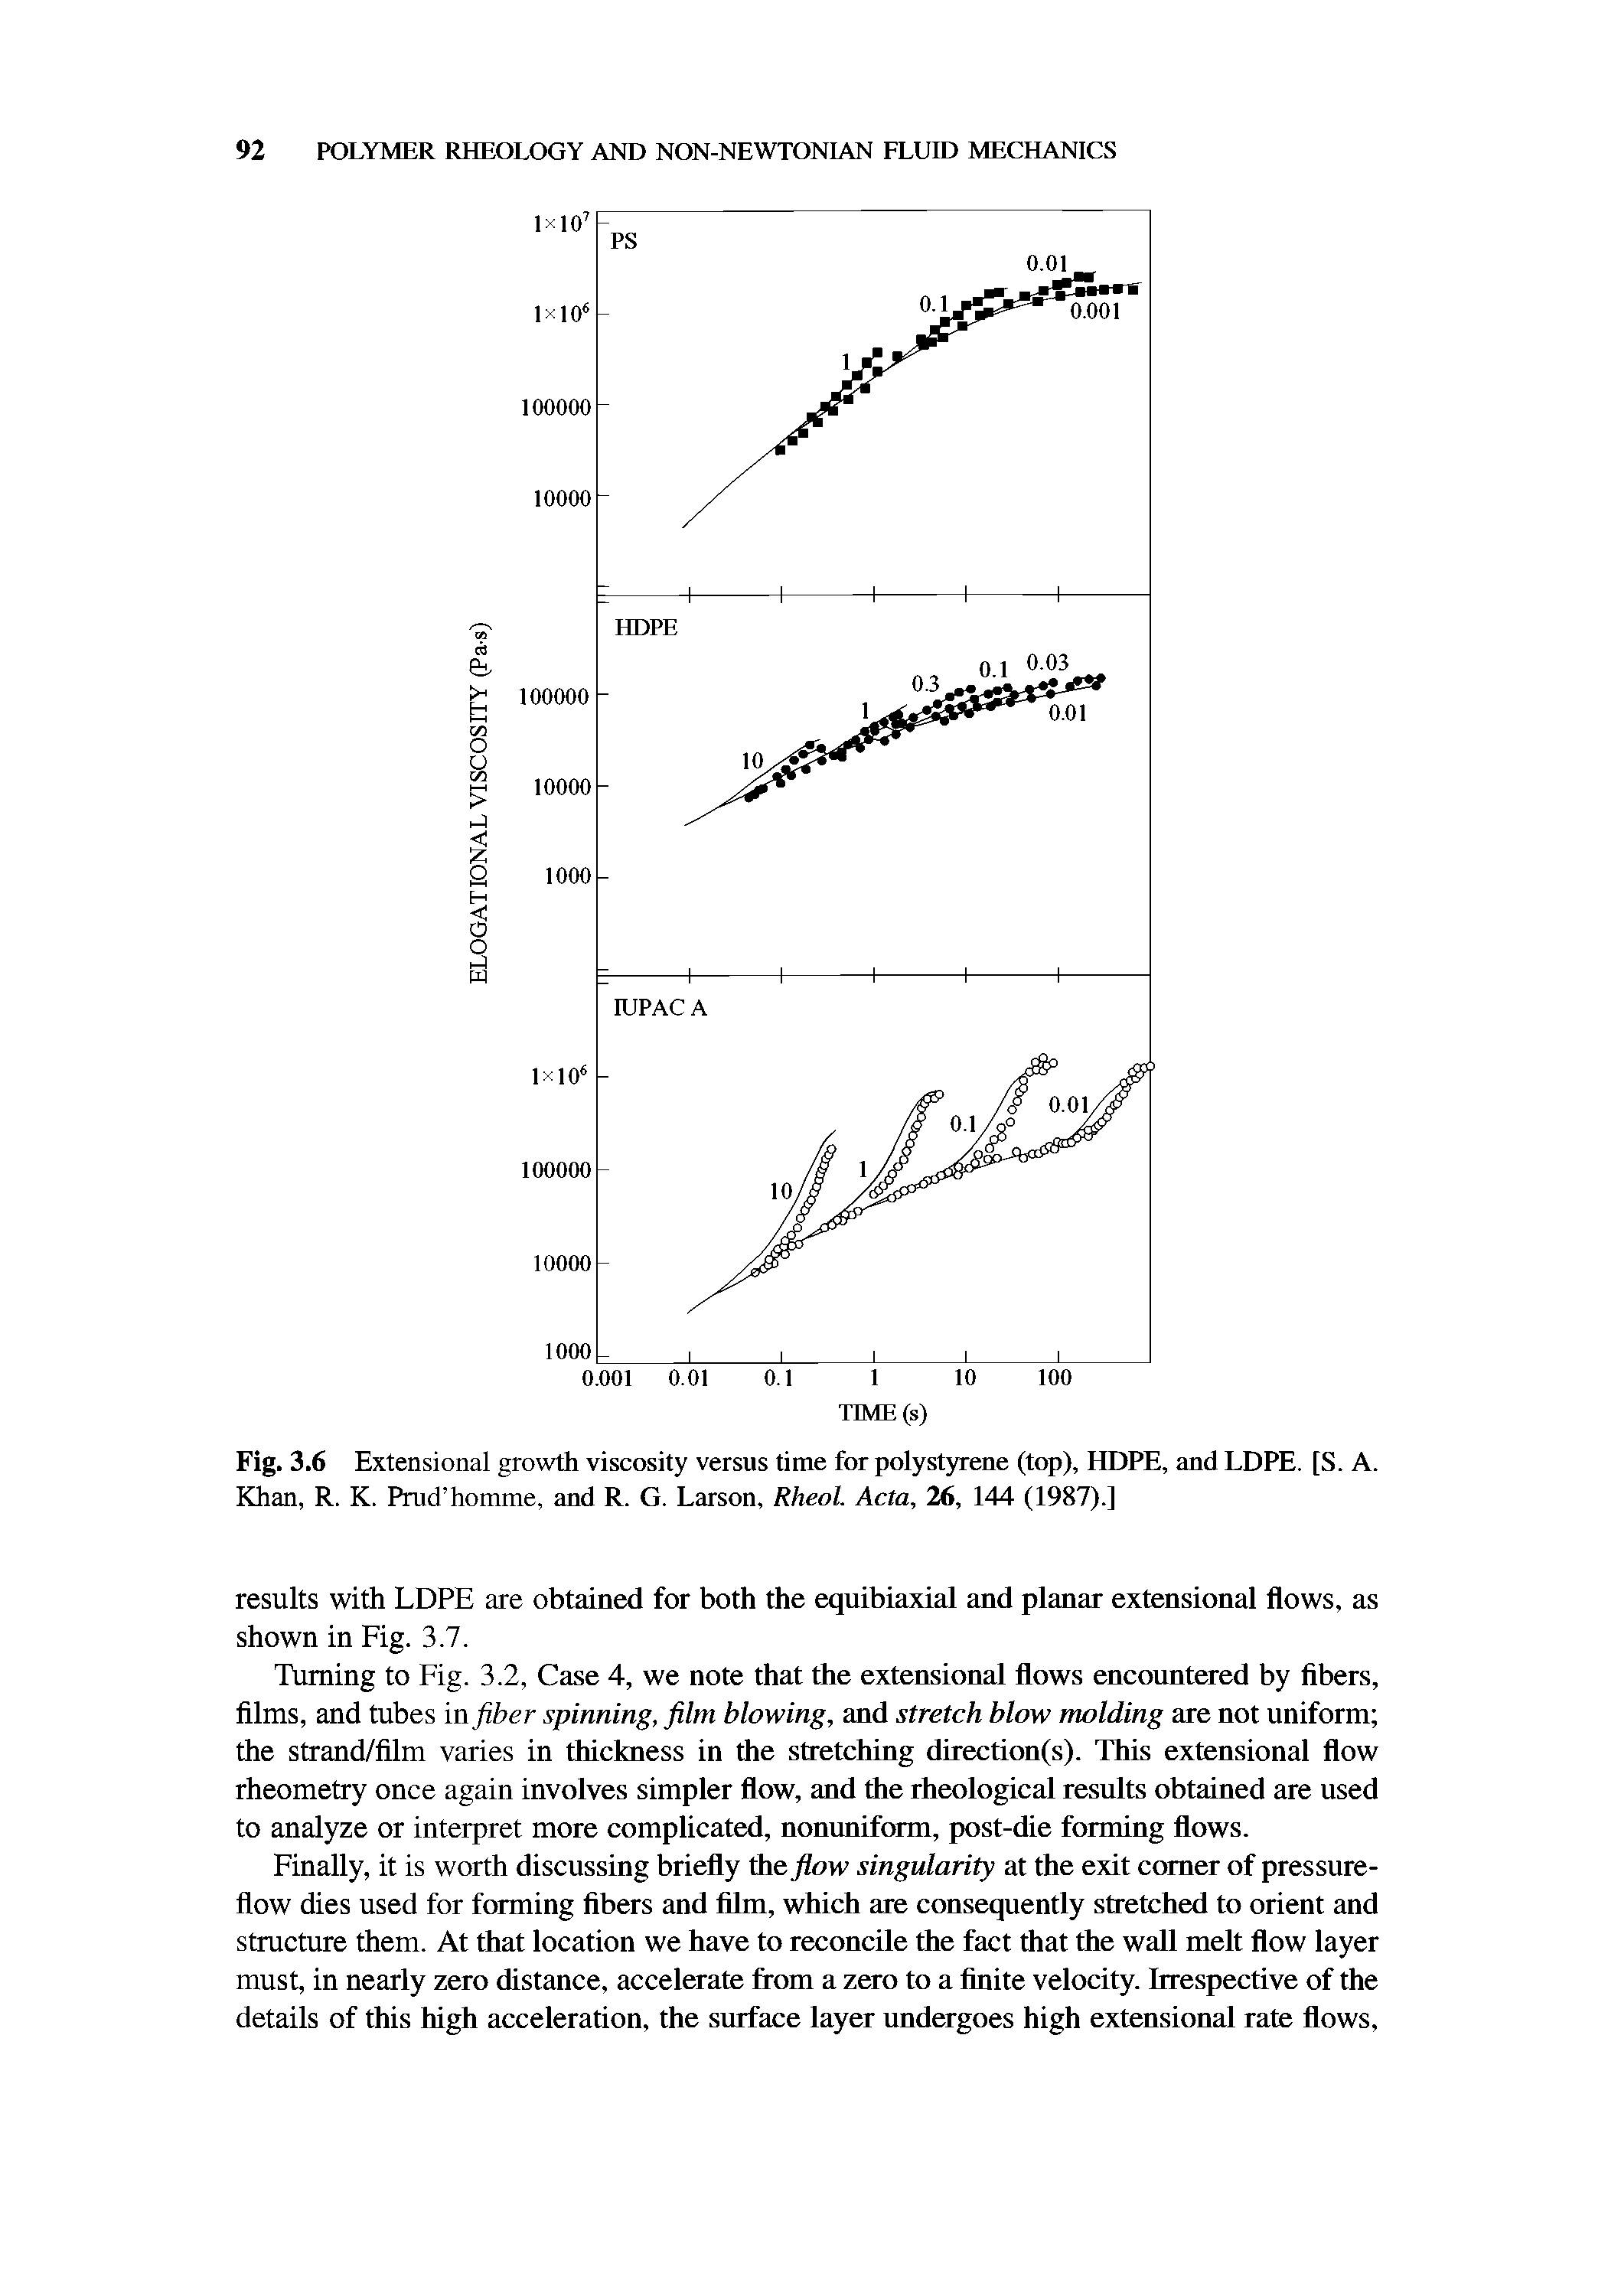 Fig. 3.6 Extensional growth viscosity versus time for polystyrene (top), HDPE, and LDPE. [S. A. Khan, R. K. Prud homme, and R. G. Larson, Rheol. Acta, 26, 144 (1987).]...